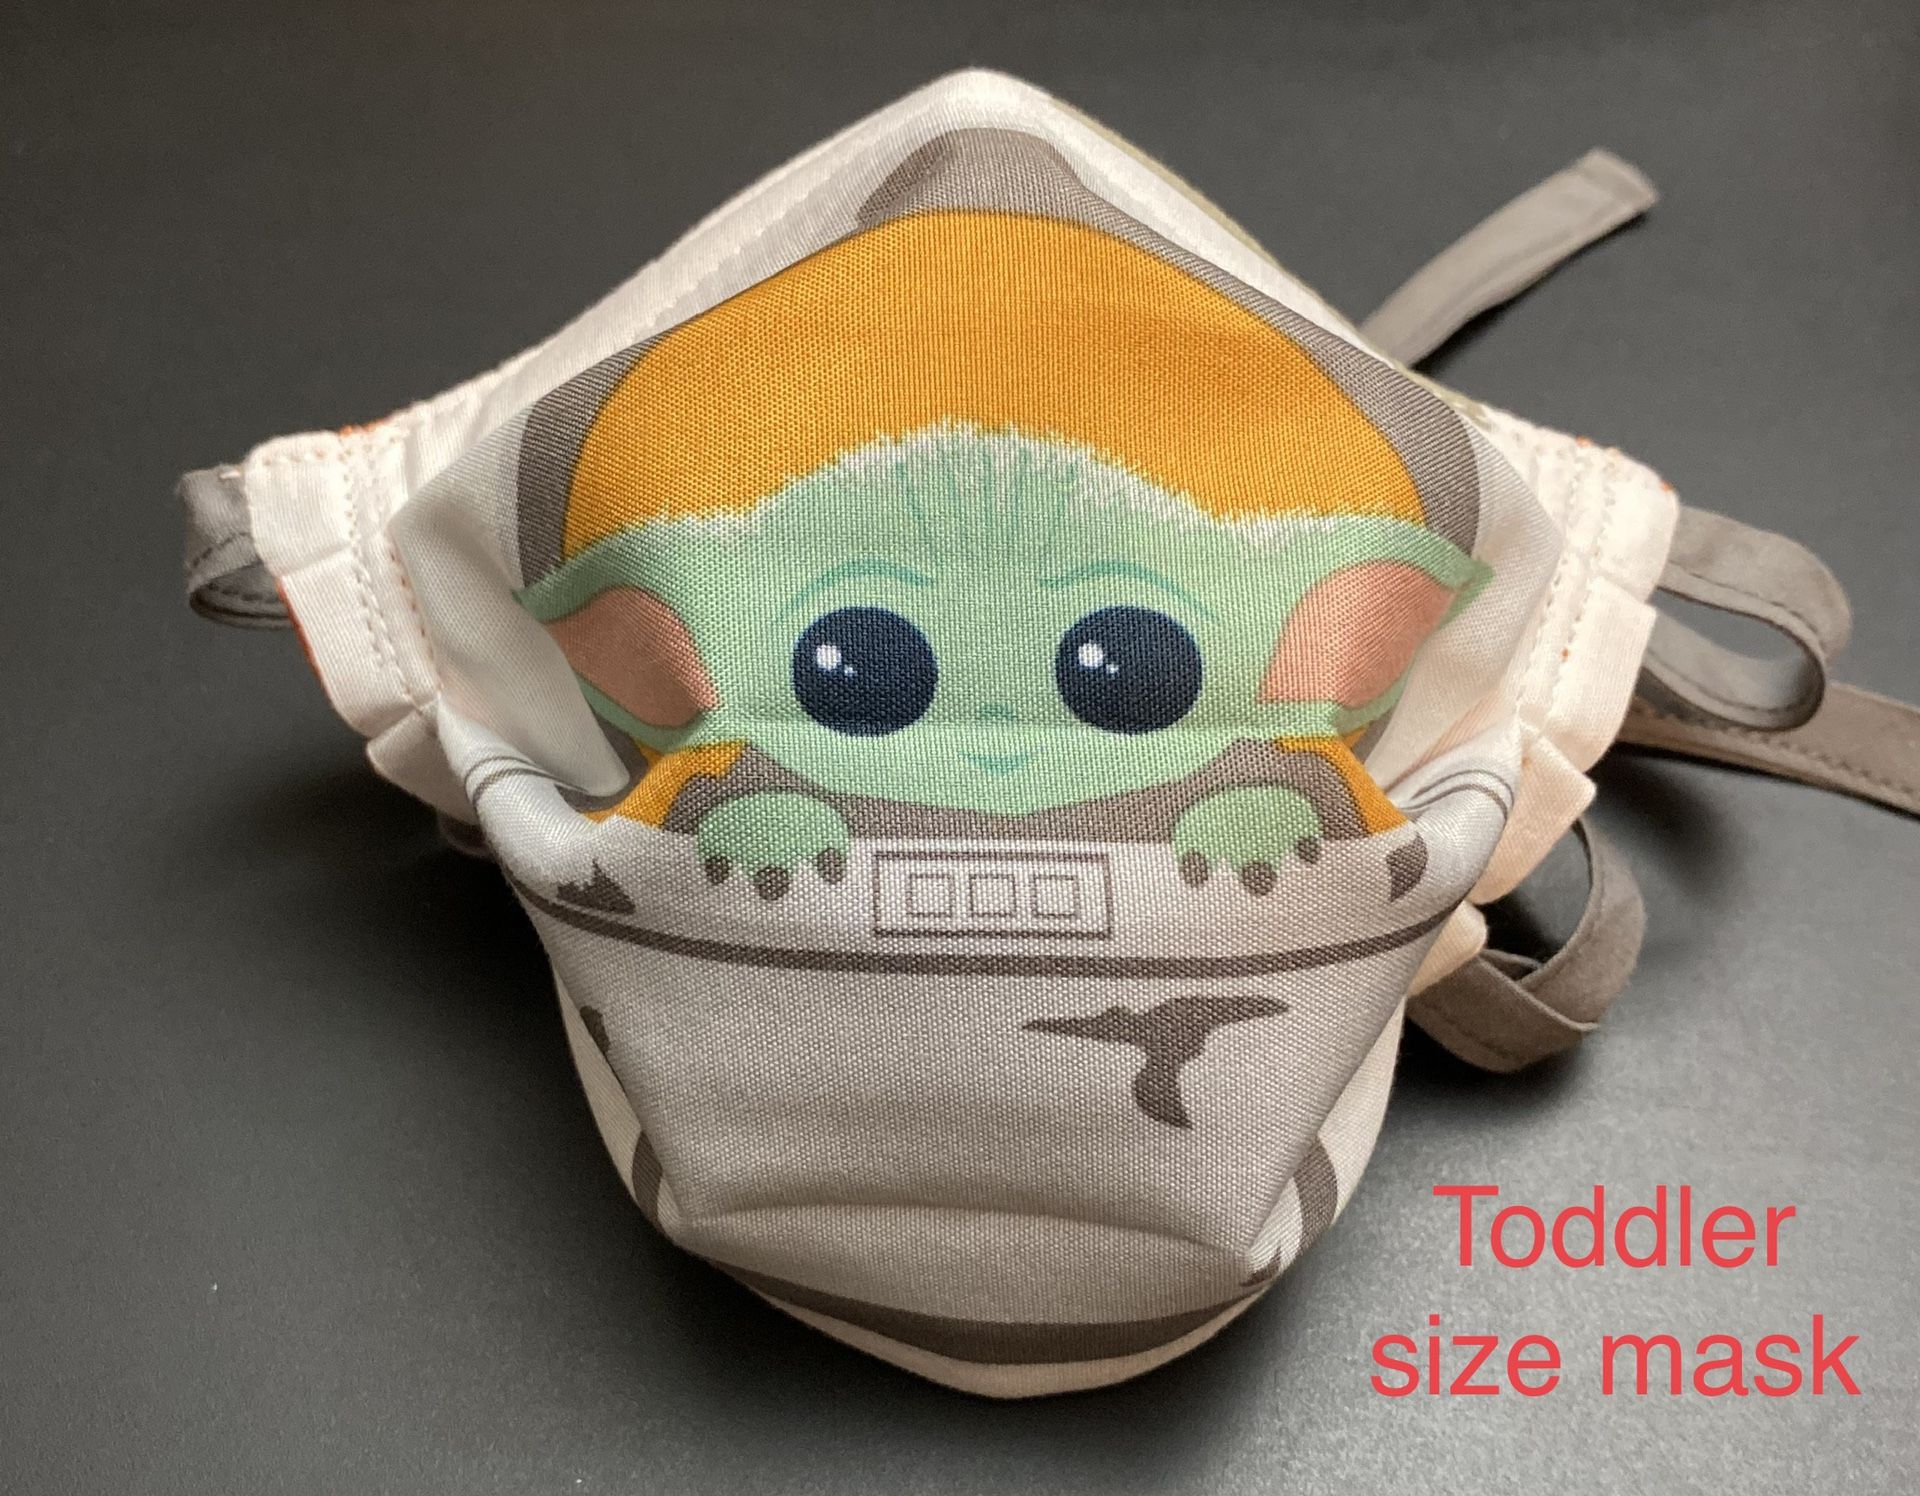 Handmade Star Wars Mandalorian Baby Yoda (Hover Crib) Toddler face mask fits 2 to 3 years old with Adjustable ear straps and nose wire